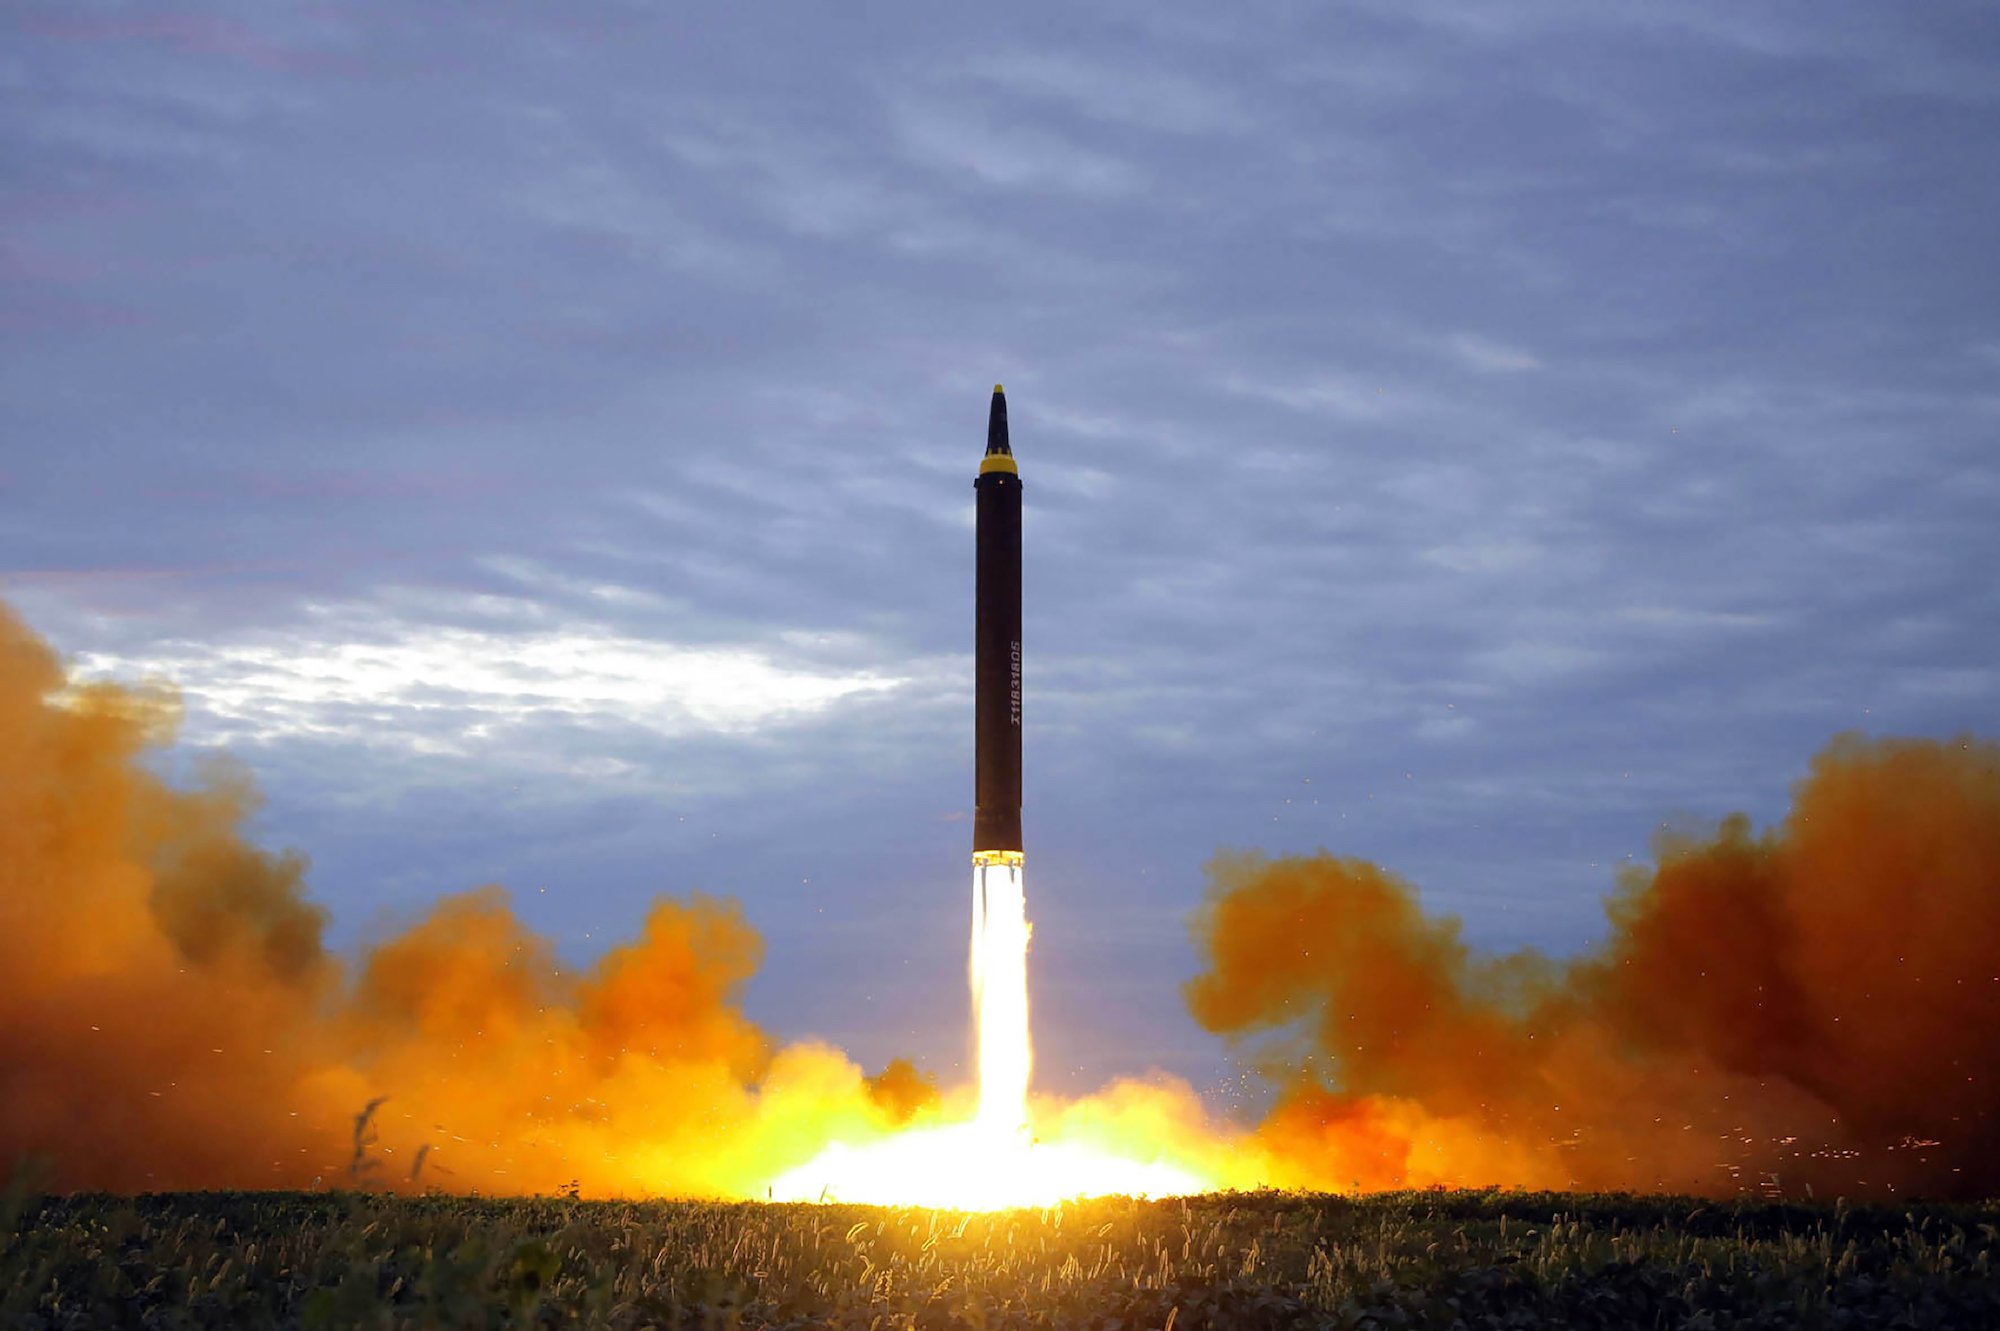 North Korea Launches ICBM Capable of Reaching Continental U.S.